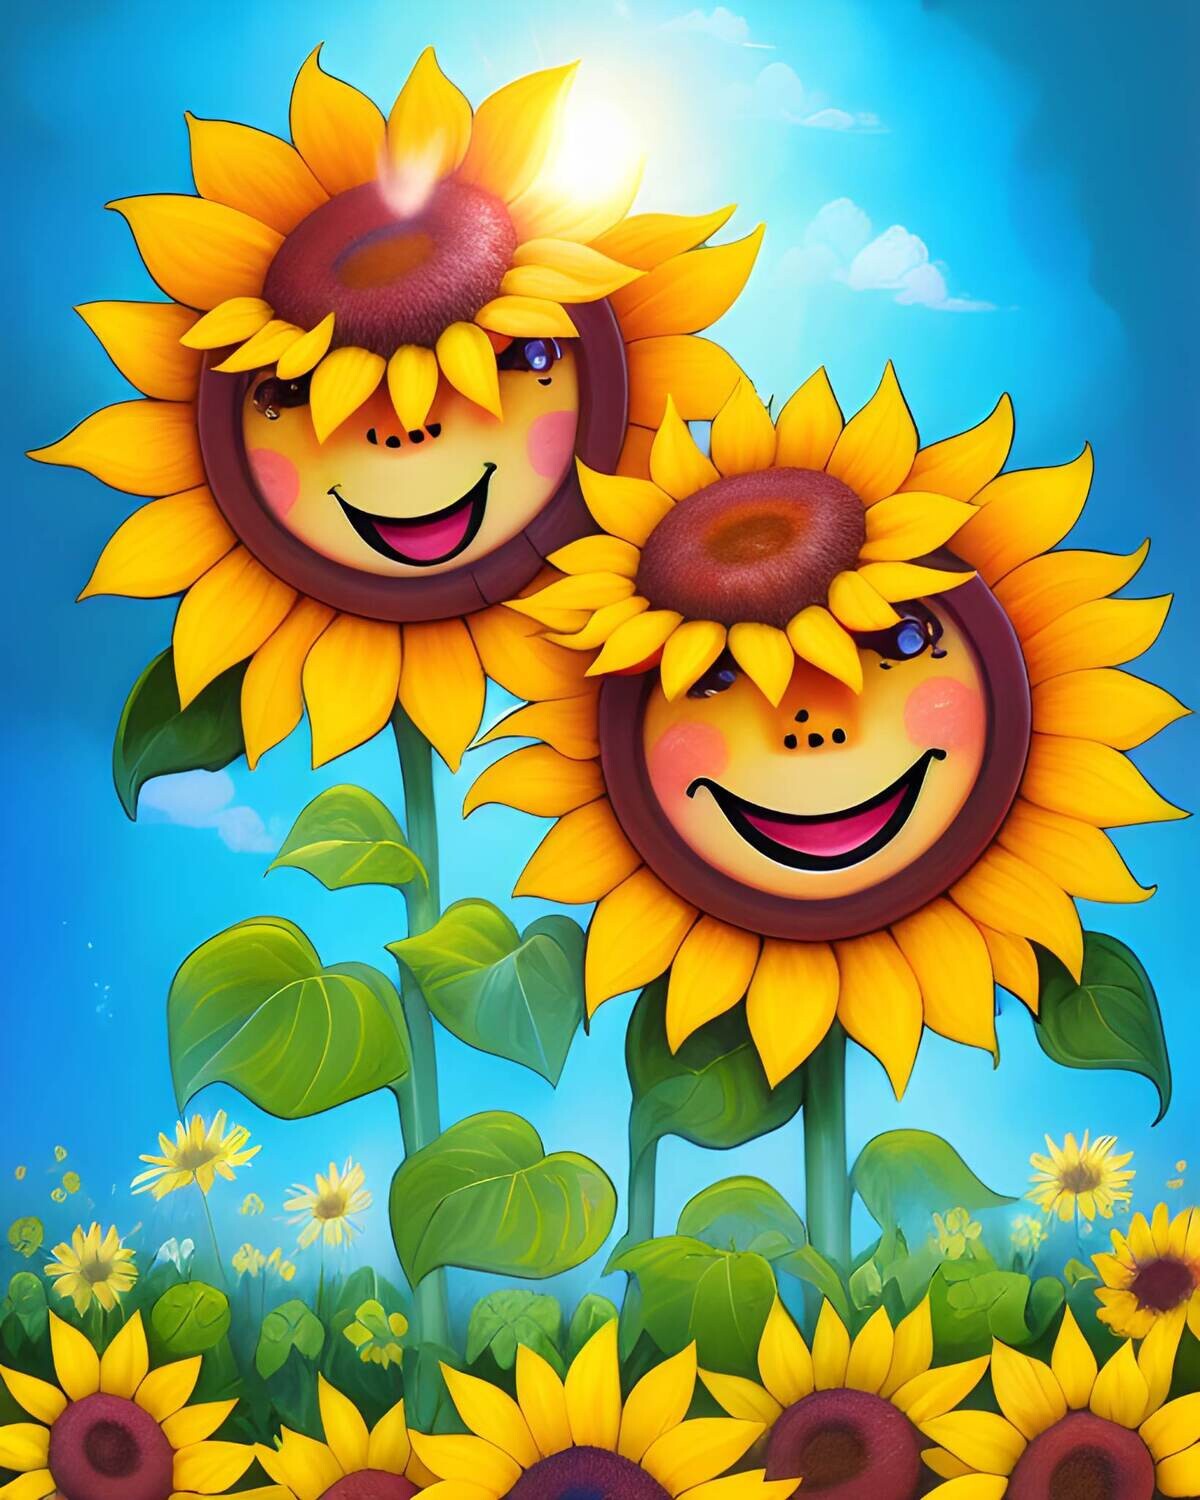 Happy Sunflowers 568 - Specially ordered for you. Delivery is approximately 4 - 6 weeks.